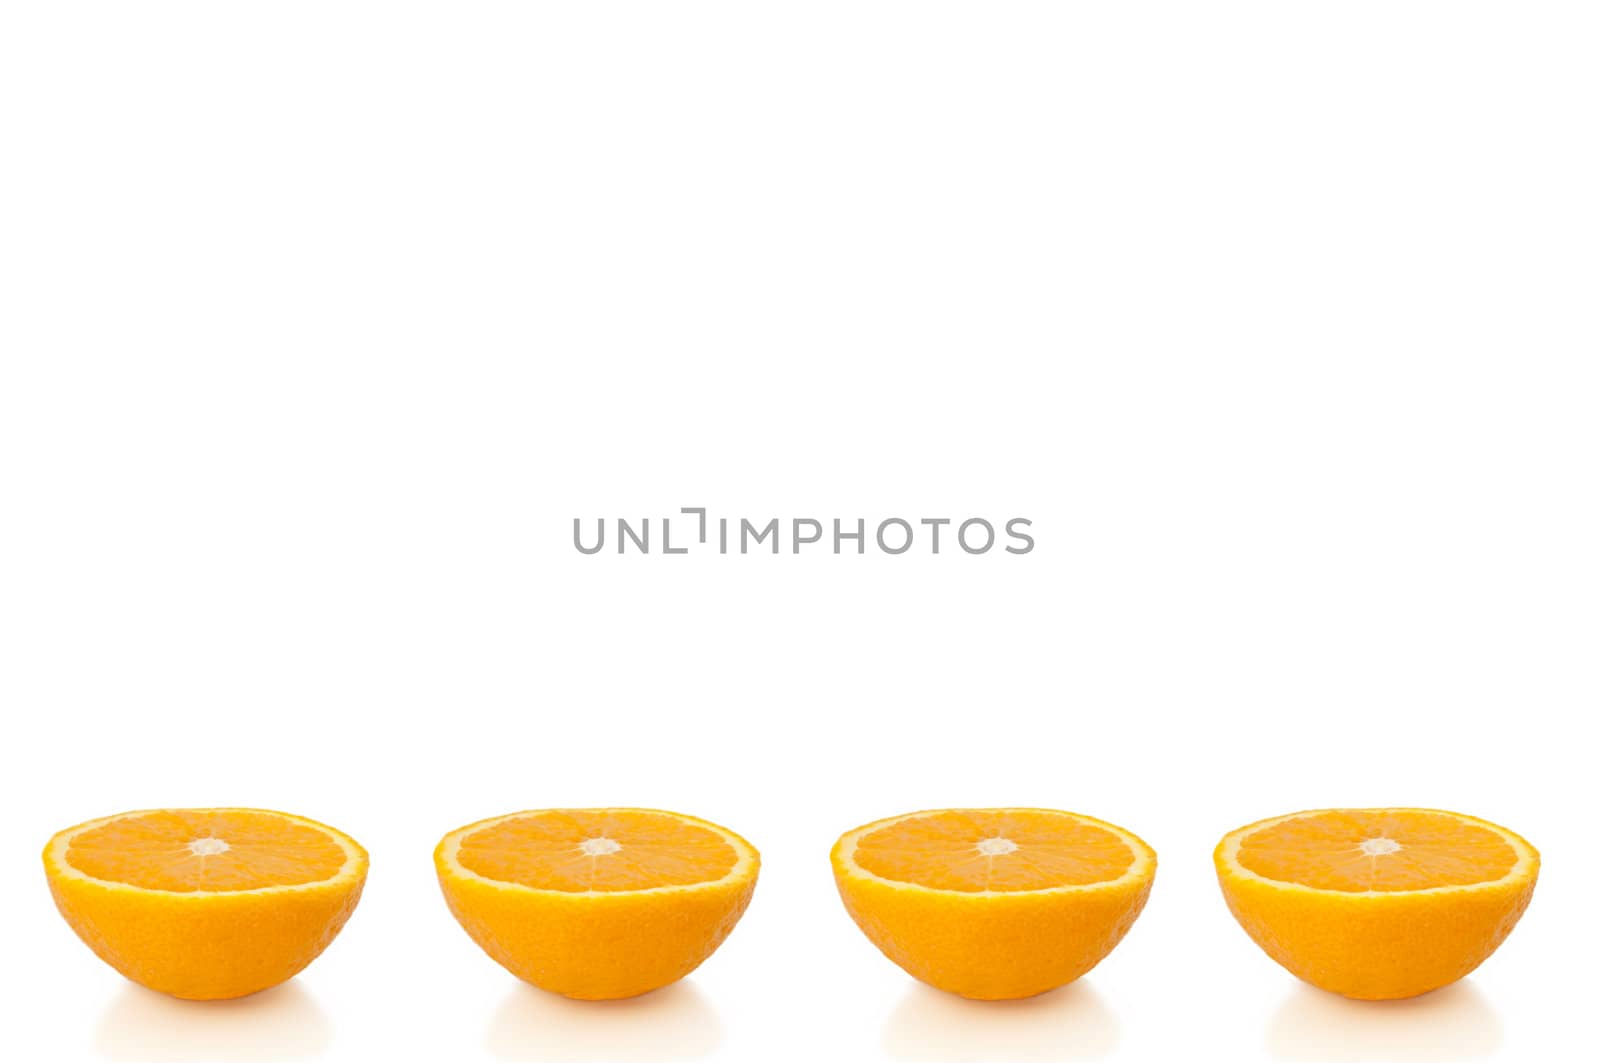 Four small orange halves arranged in a horizontal line along the bottom of the image and over white.